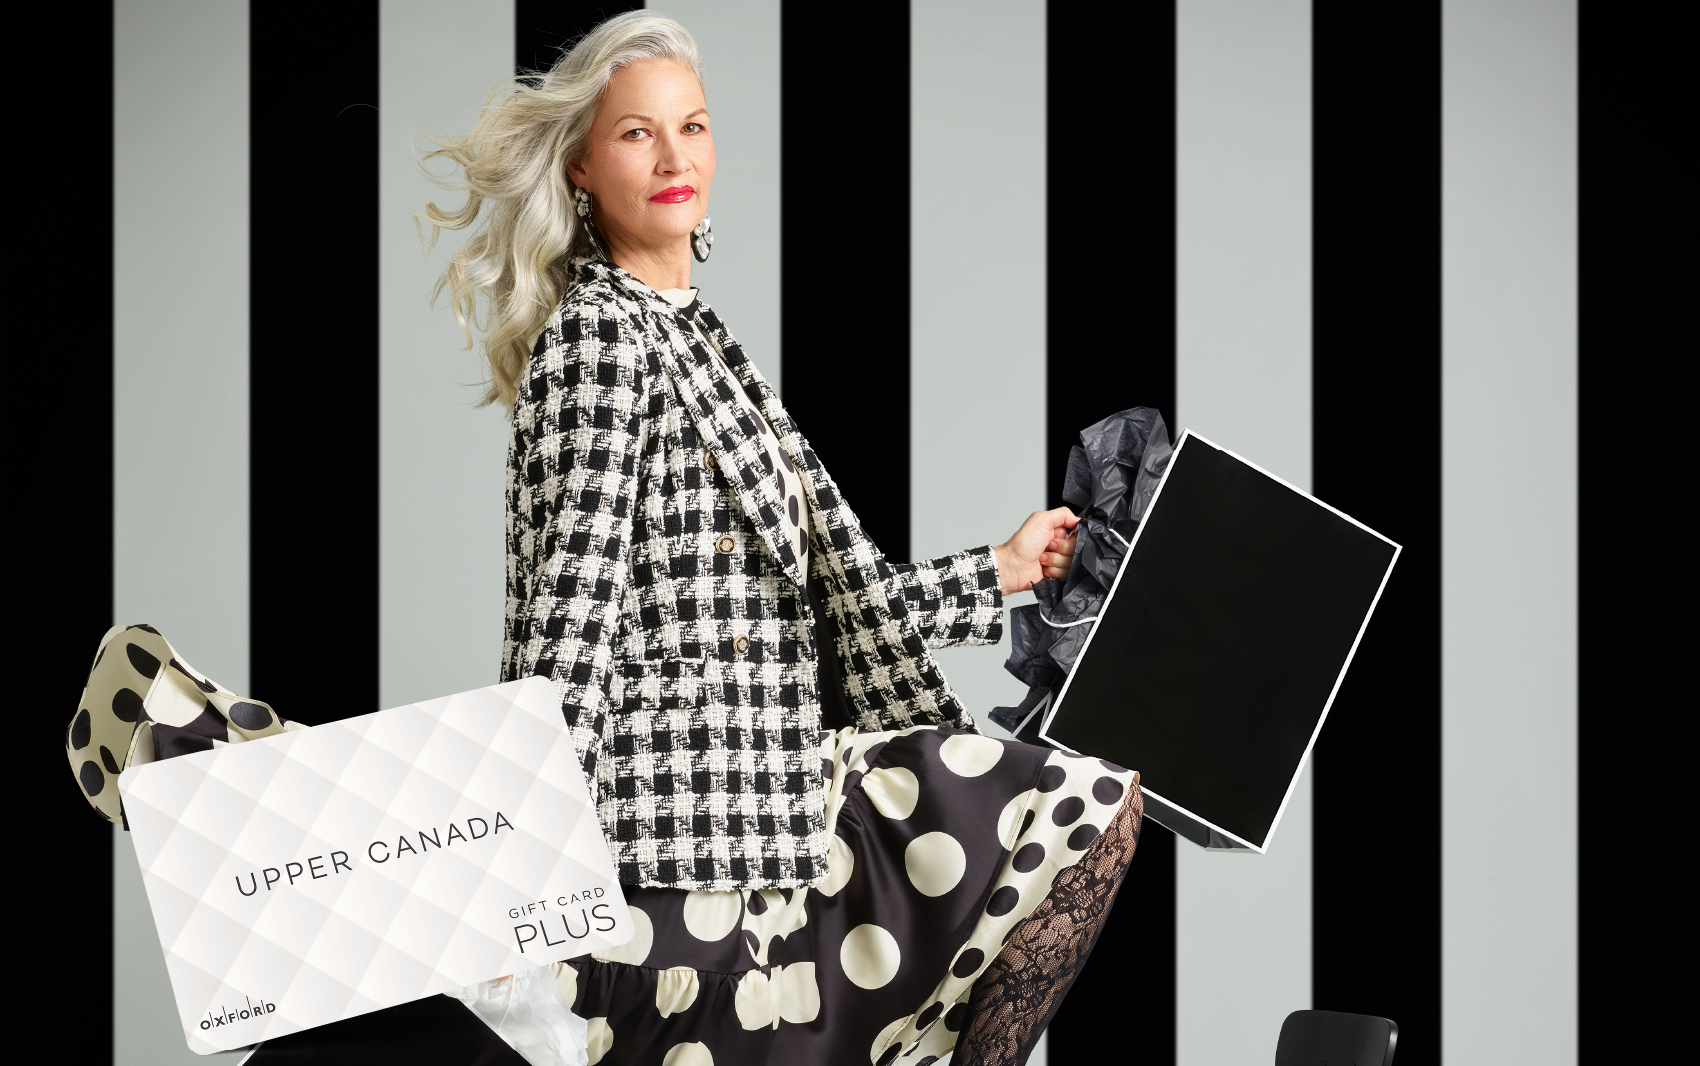 promotional image for a UCM gift card. It shows a woman wearing a black and white houndstooth blazer and black and white polka dot skirt holding black and white shopping bags. A UCM gift card is also in the image